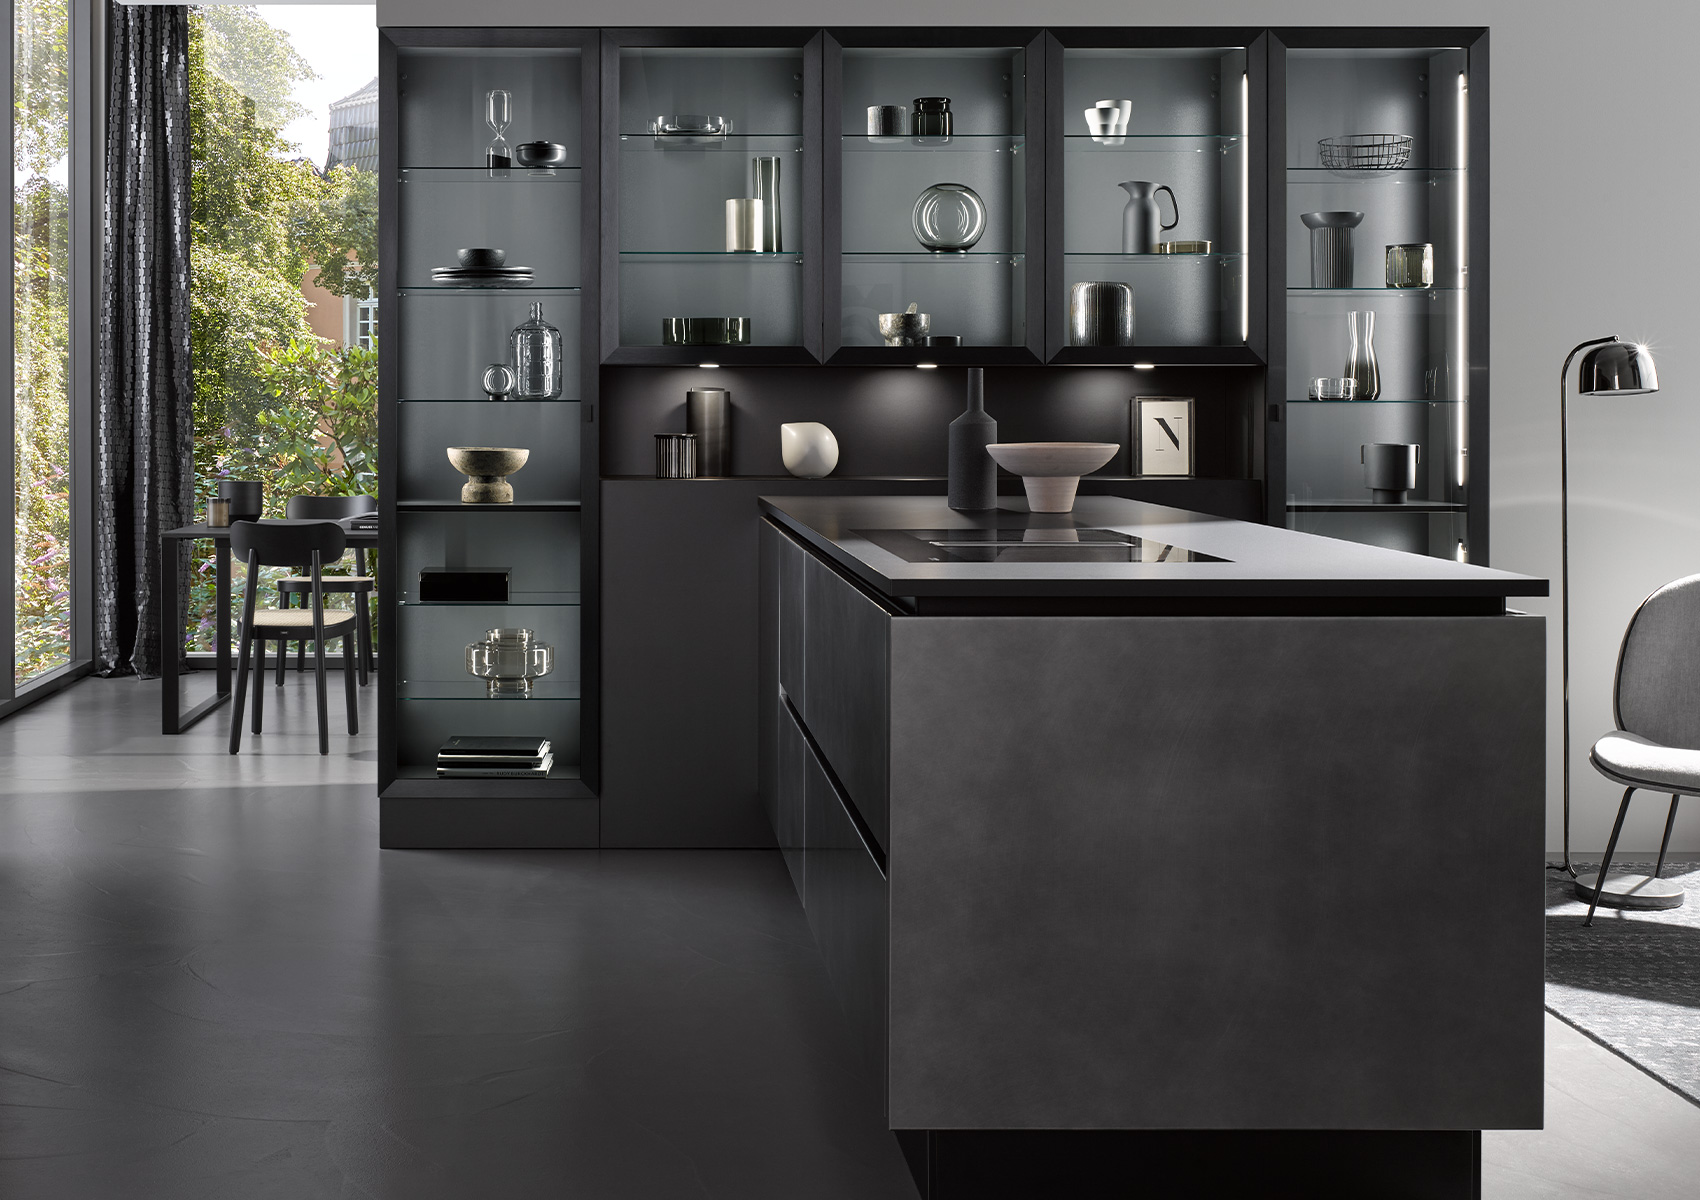 Metal-framed, glass-fronted tall cabinets adjoin the kitchen island with AV 7070 Industrial Steel finish